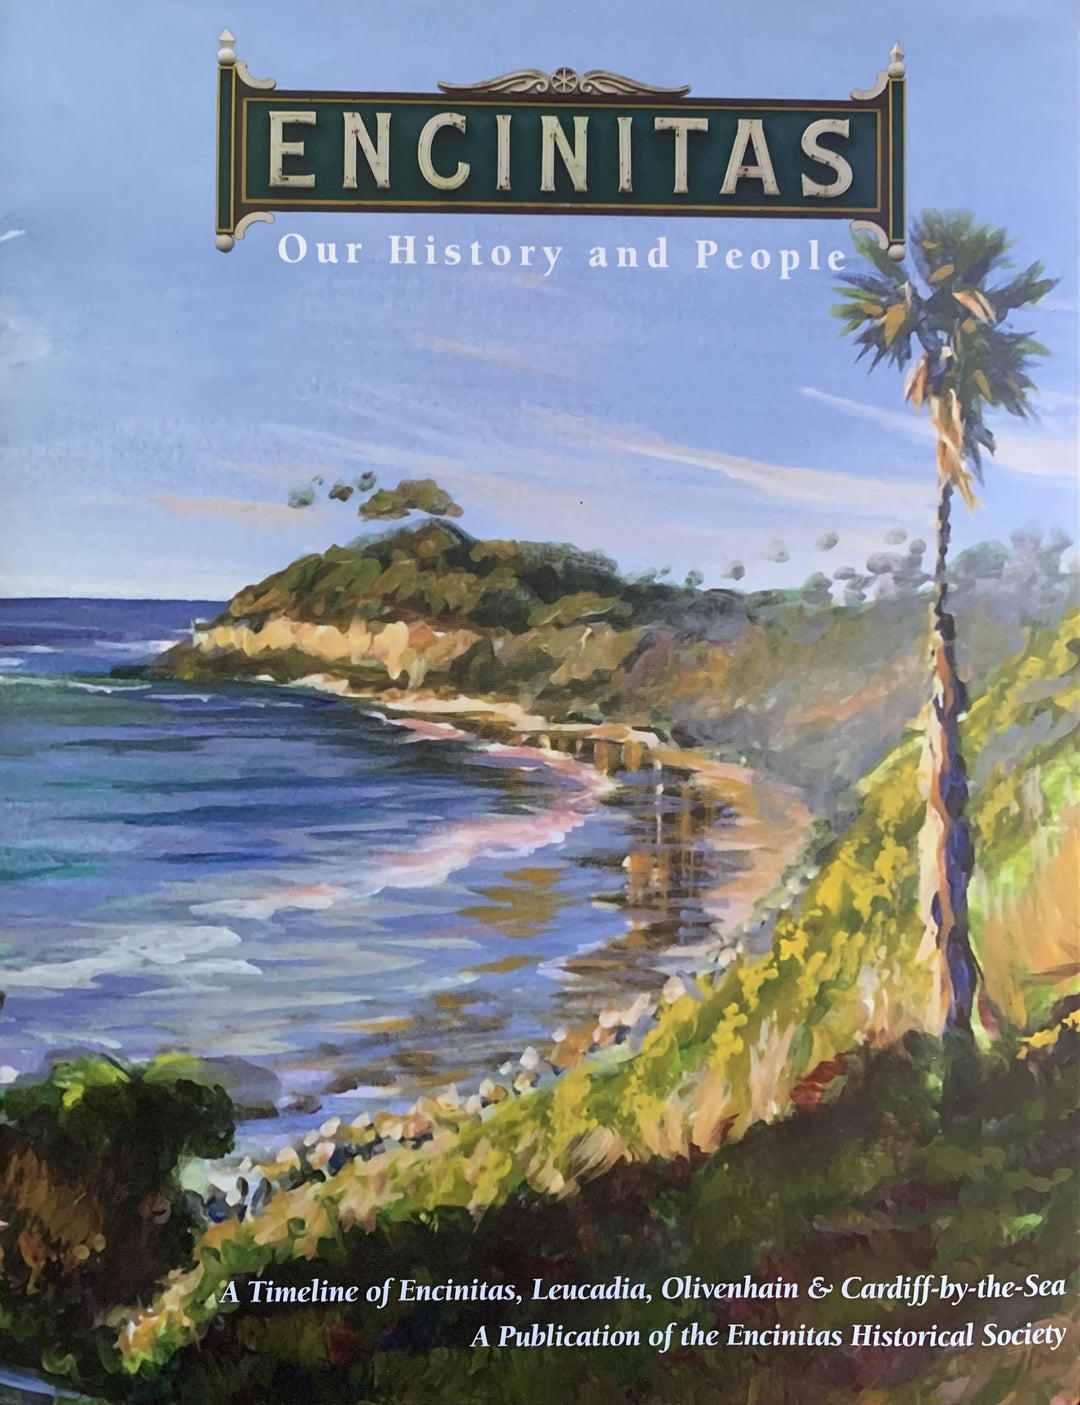 ENCINITAS: OUR HISTORY AND PEOPLE Hardcover Book Sale